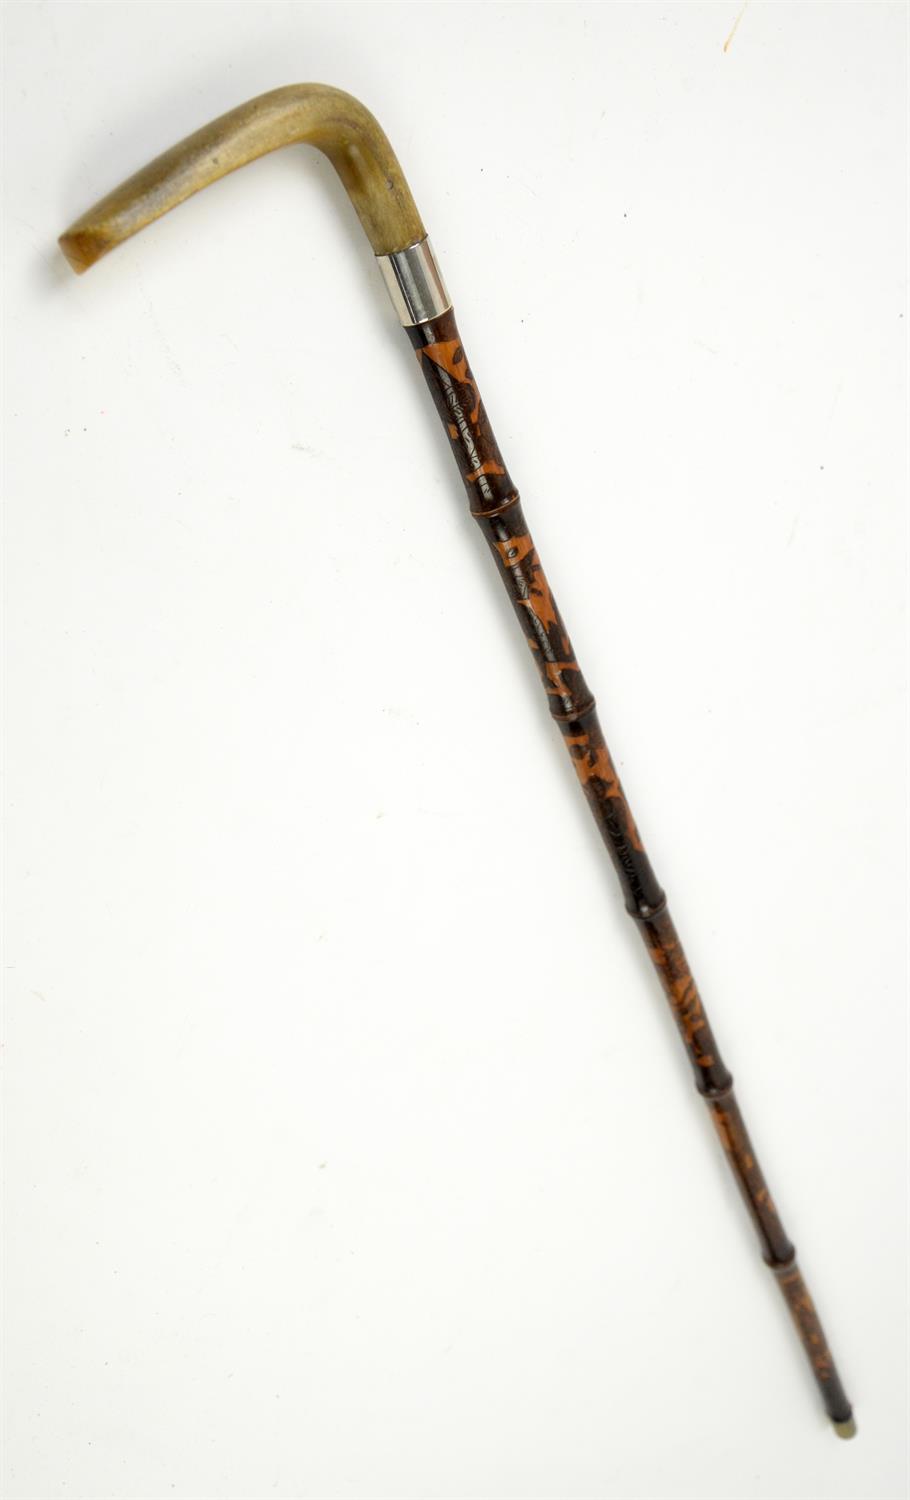 Late 19th/early 20th century swordstick, with carved horn handle and the cane sheath carved